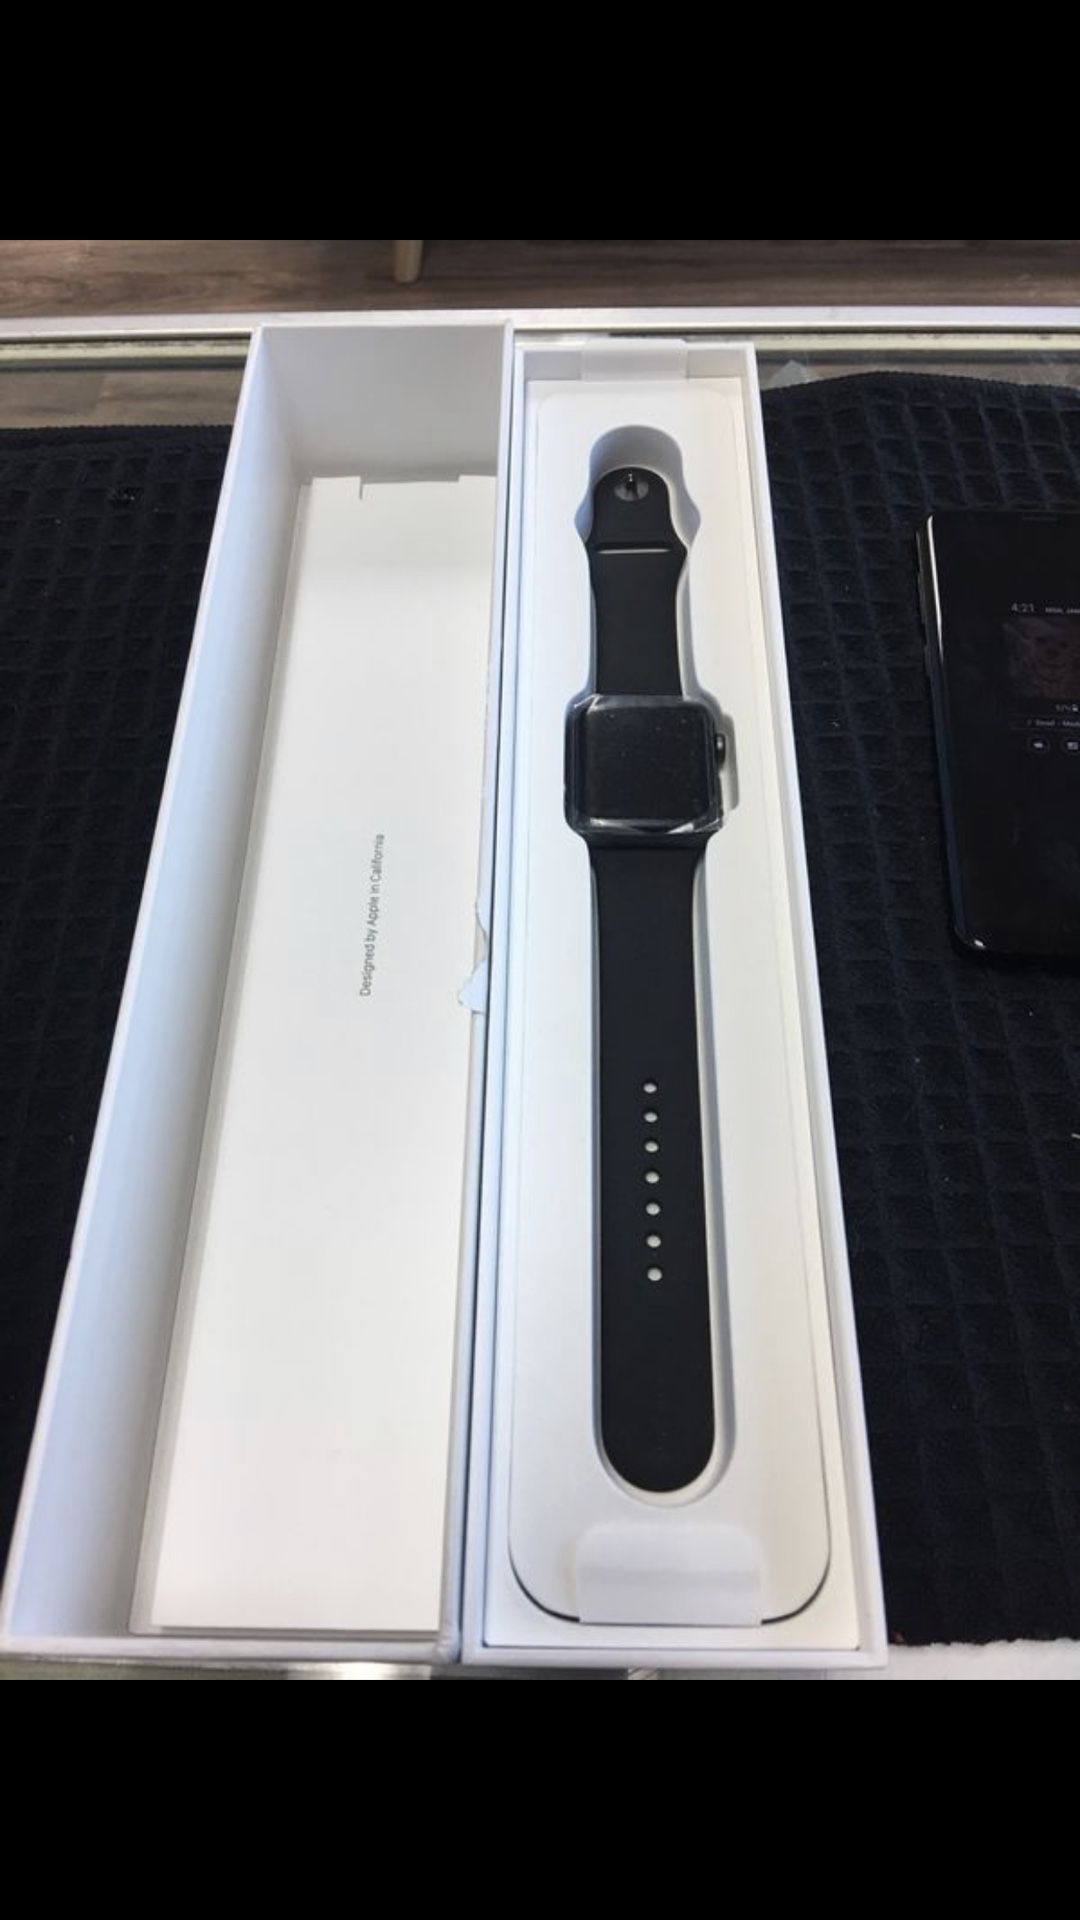 Brand New Apple Watch Series 3 42mm Space Gray sport band black